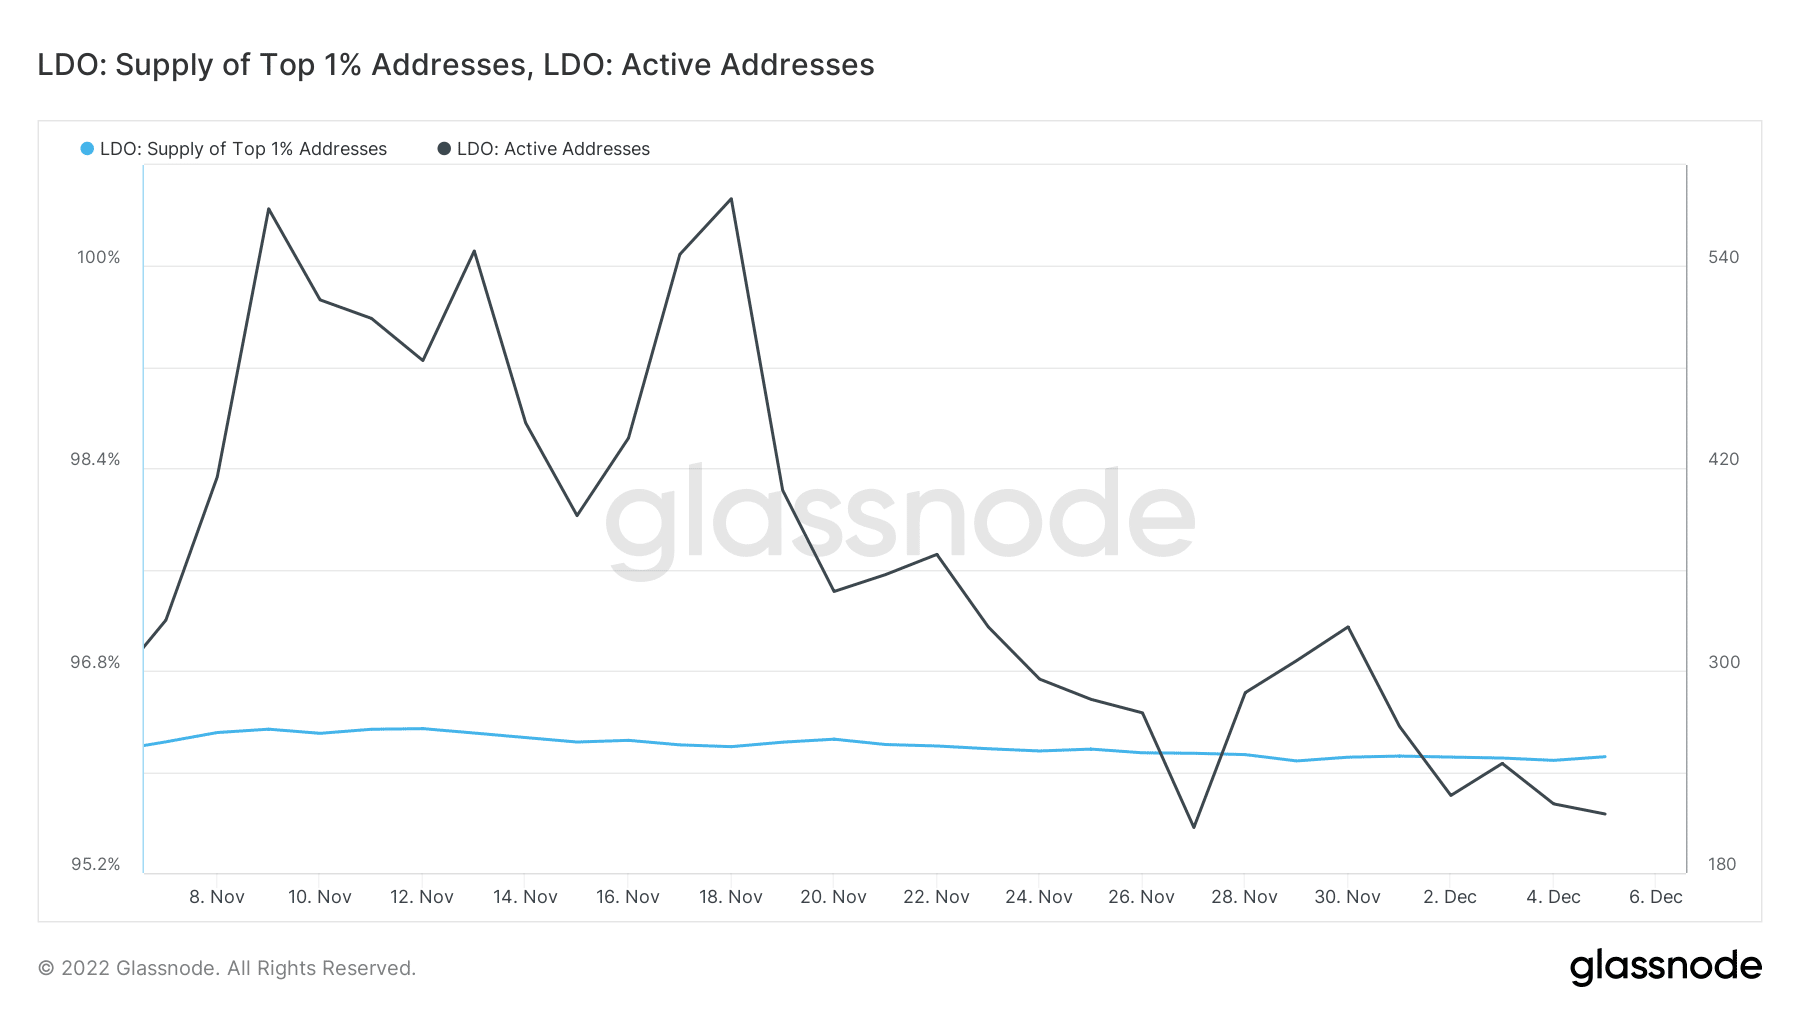 Lido active addresses and supply held by top 1% addresses